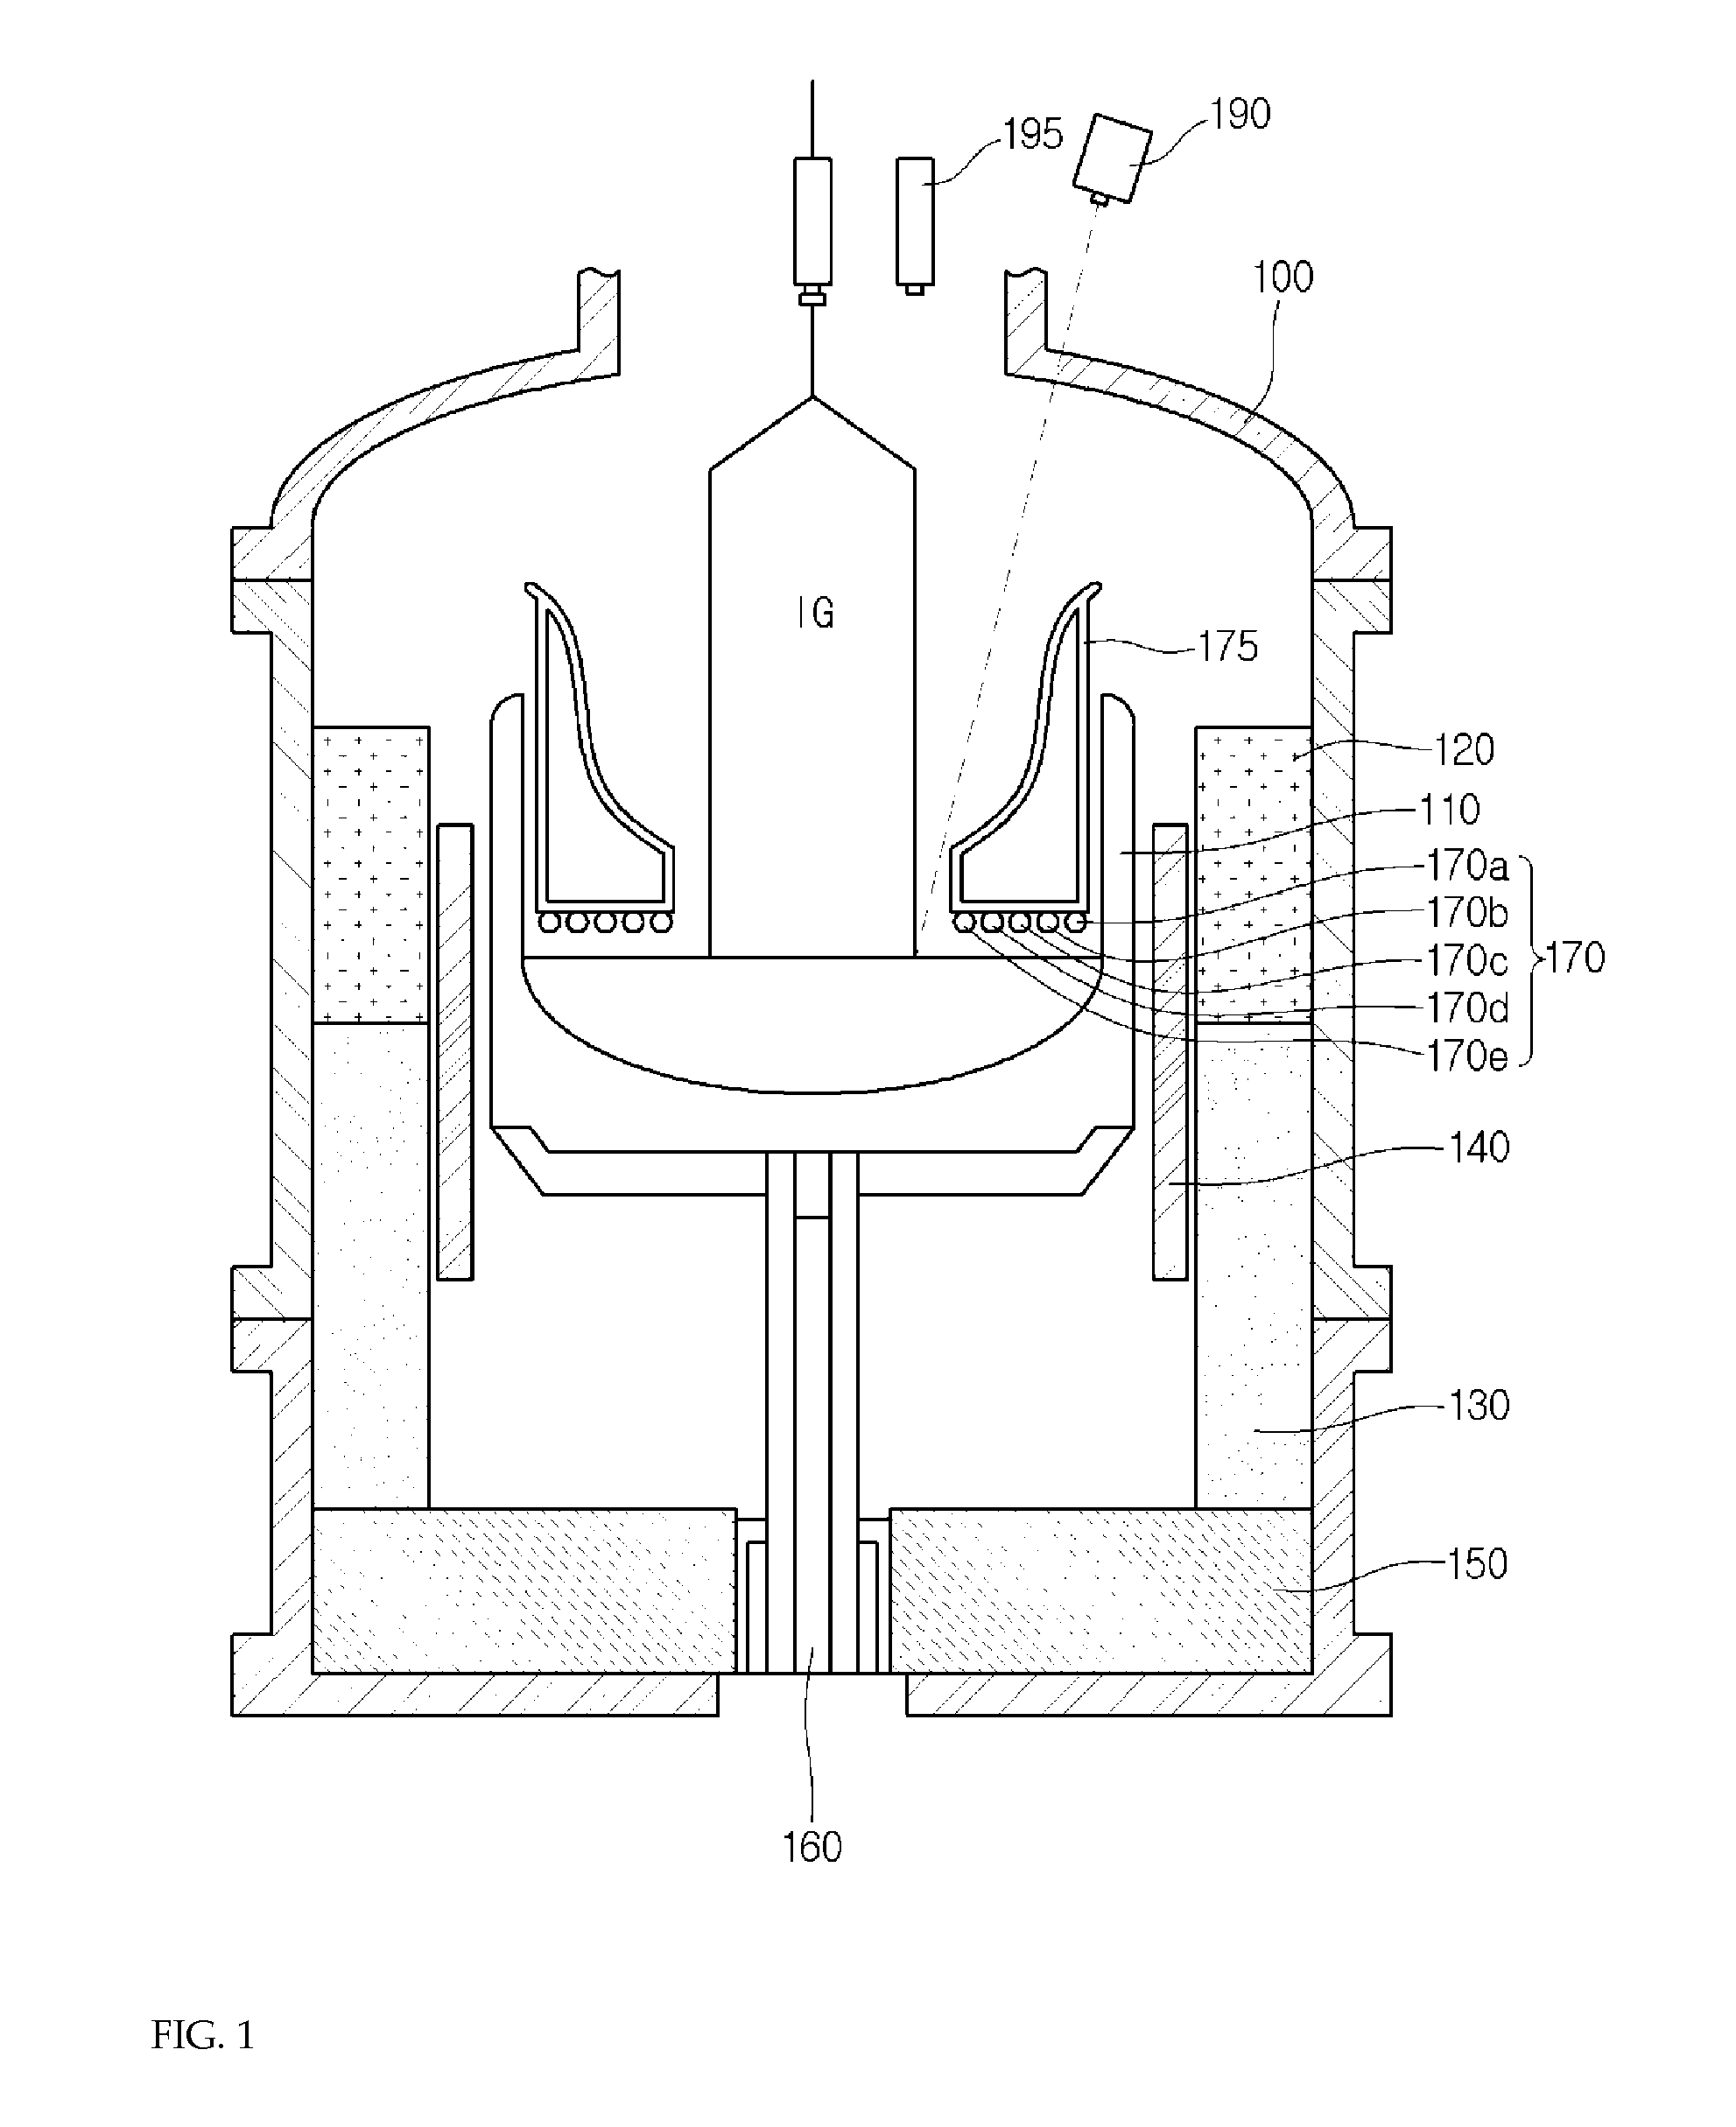 Silicon single crystal growing device and method of growing the same